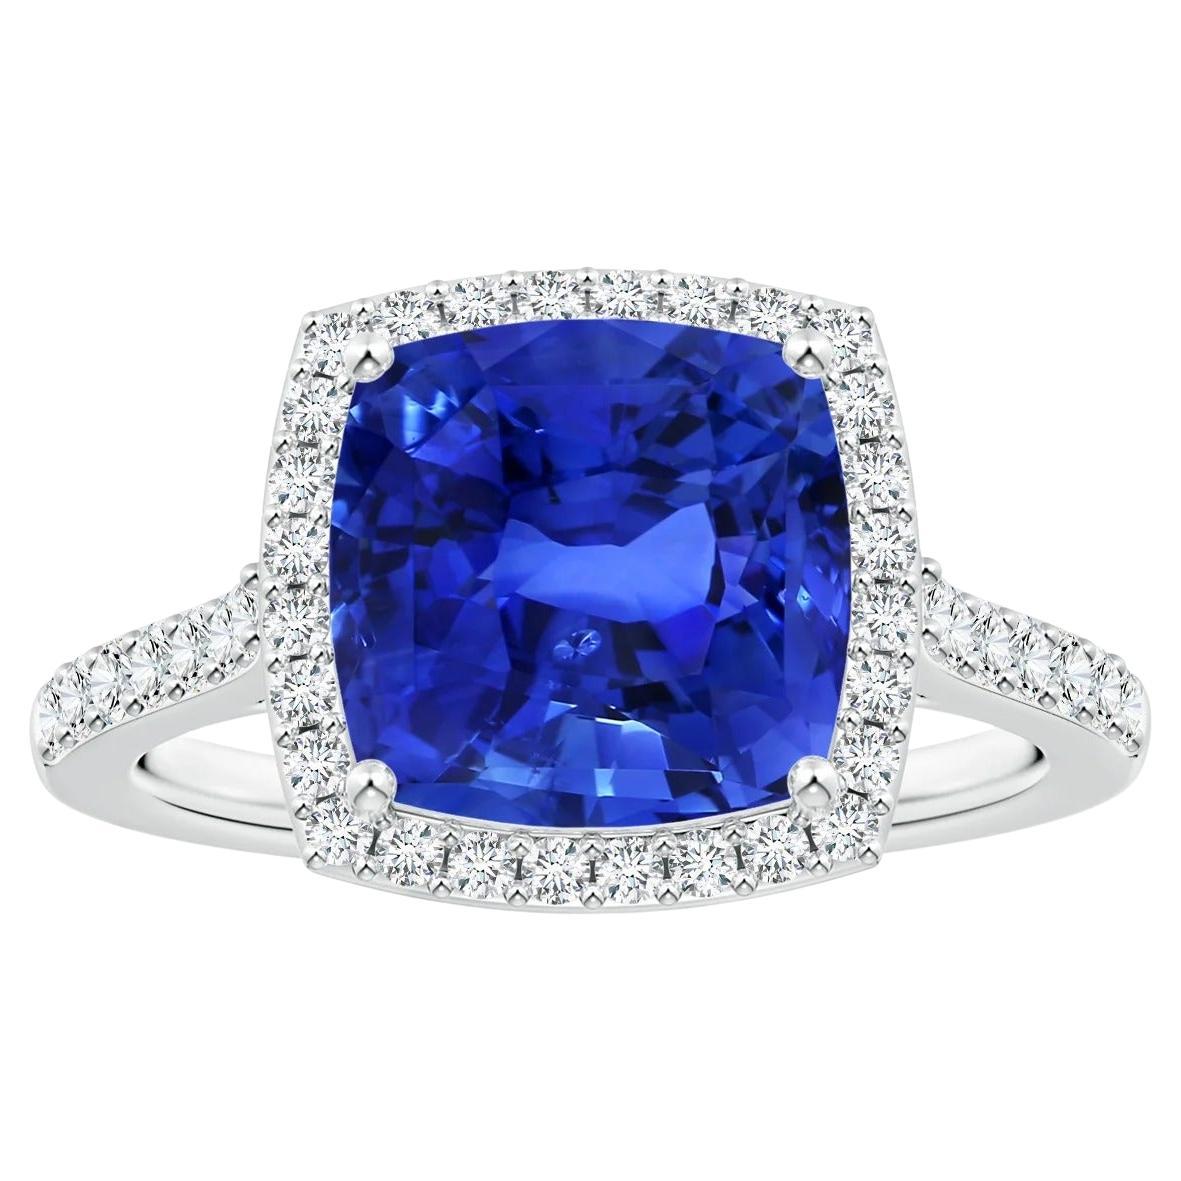 ANGARA GIA Certified Natural Blue Sapphire Halo Ring in Platinum with Diamonds